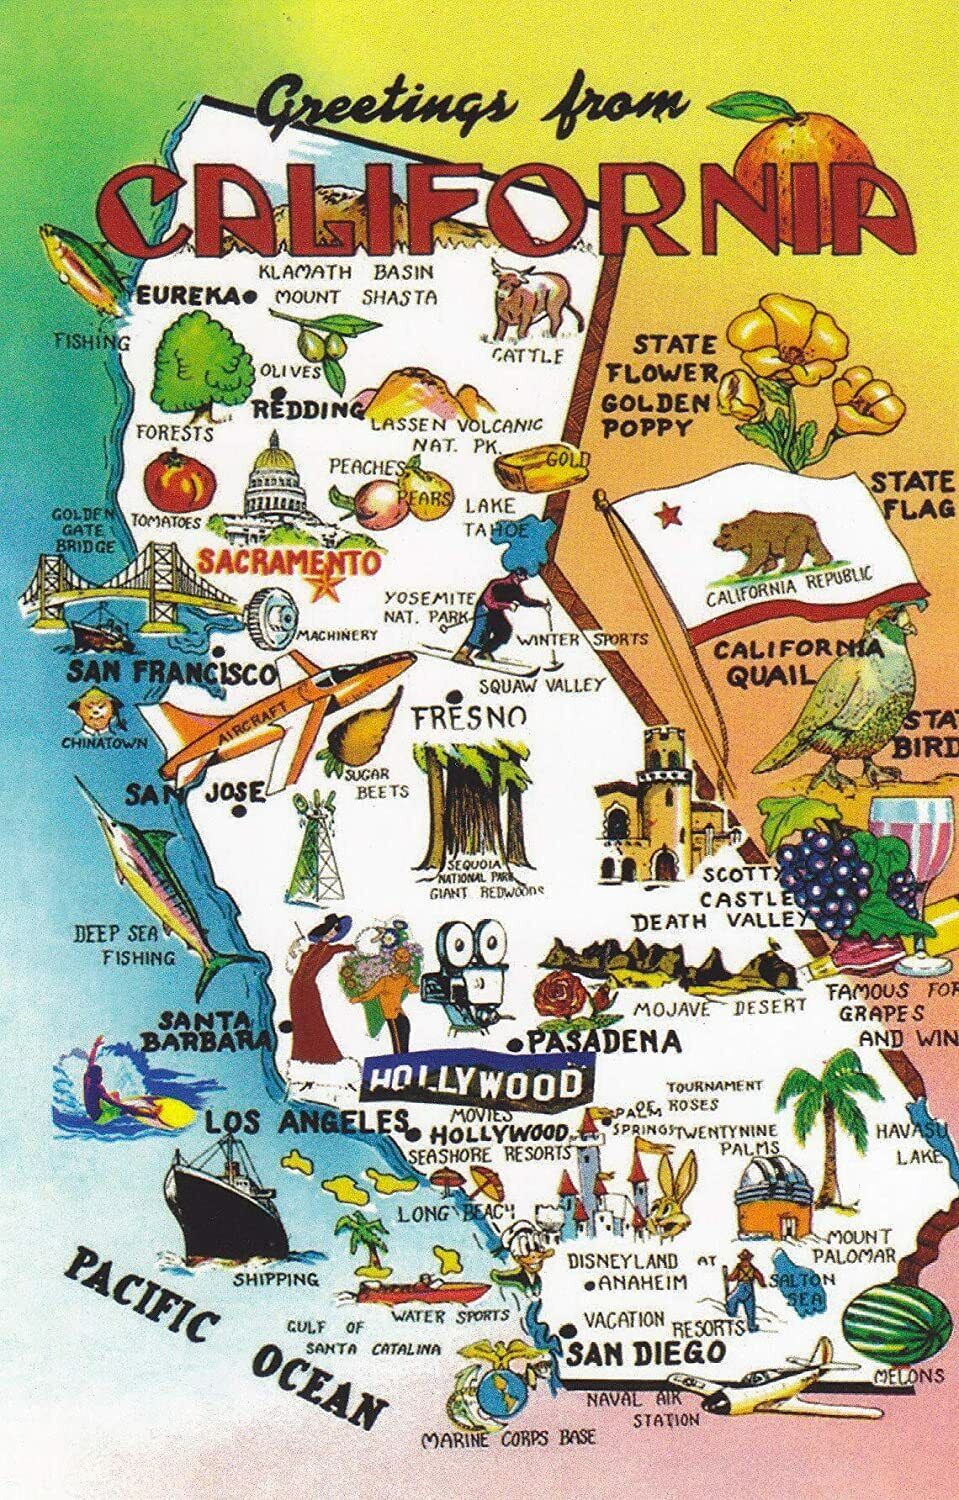 GREETINGS FROM CALIFORNIA MAP, SKDG-03  One 1 Card 090  WELCOME